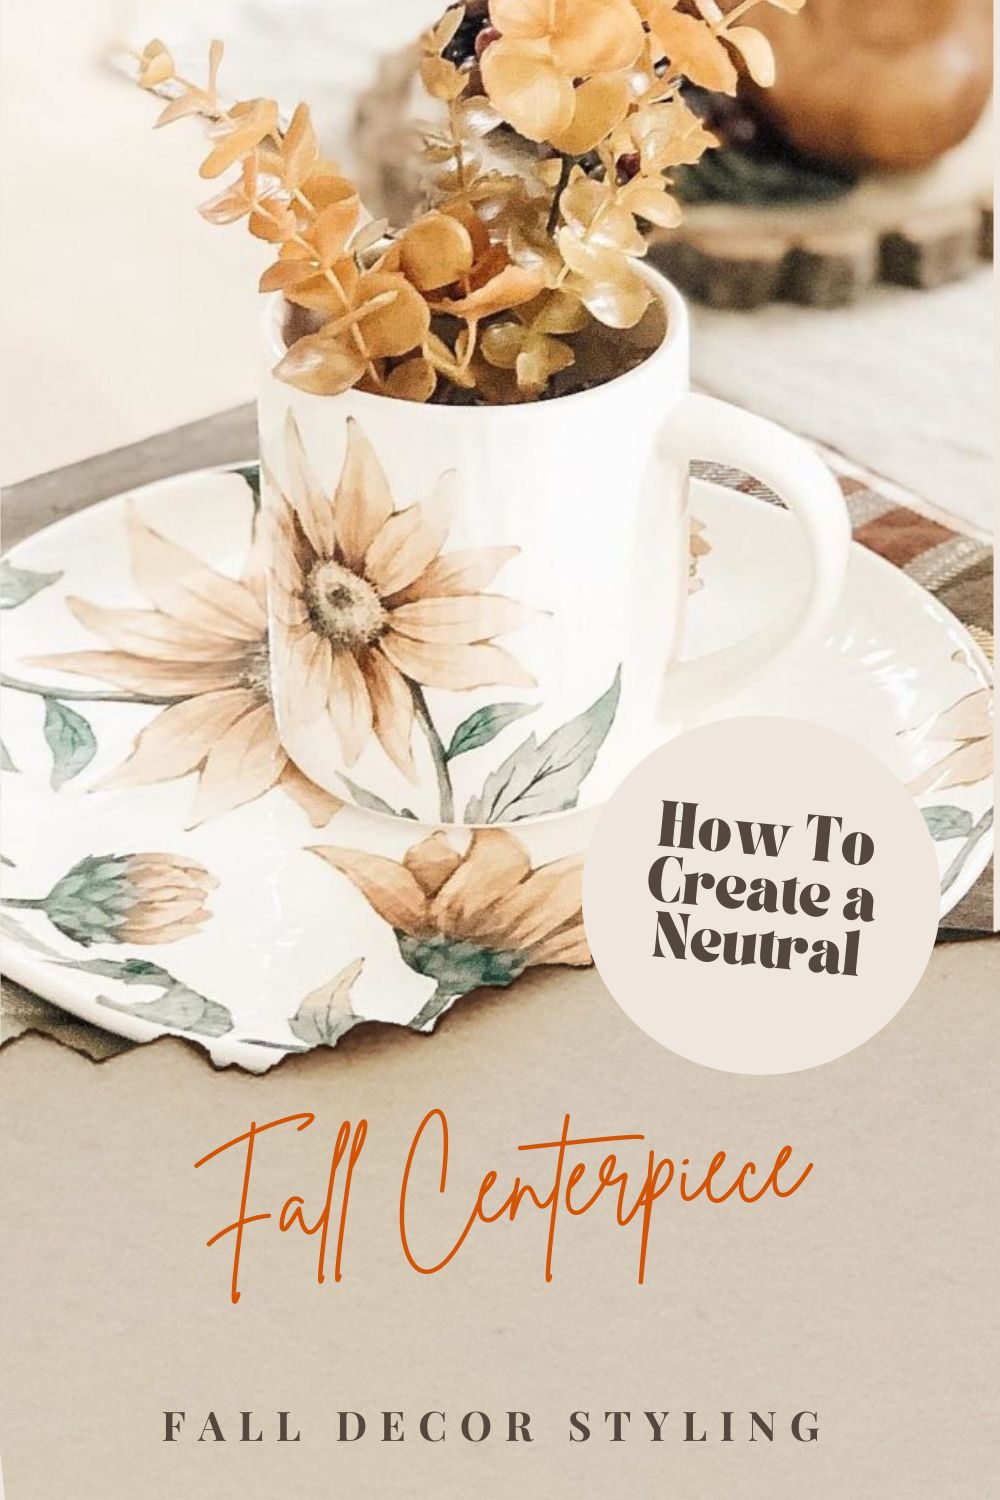 How to Create a Neutral Fall Centerpiece